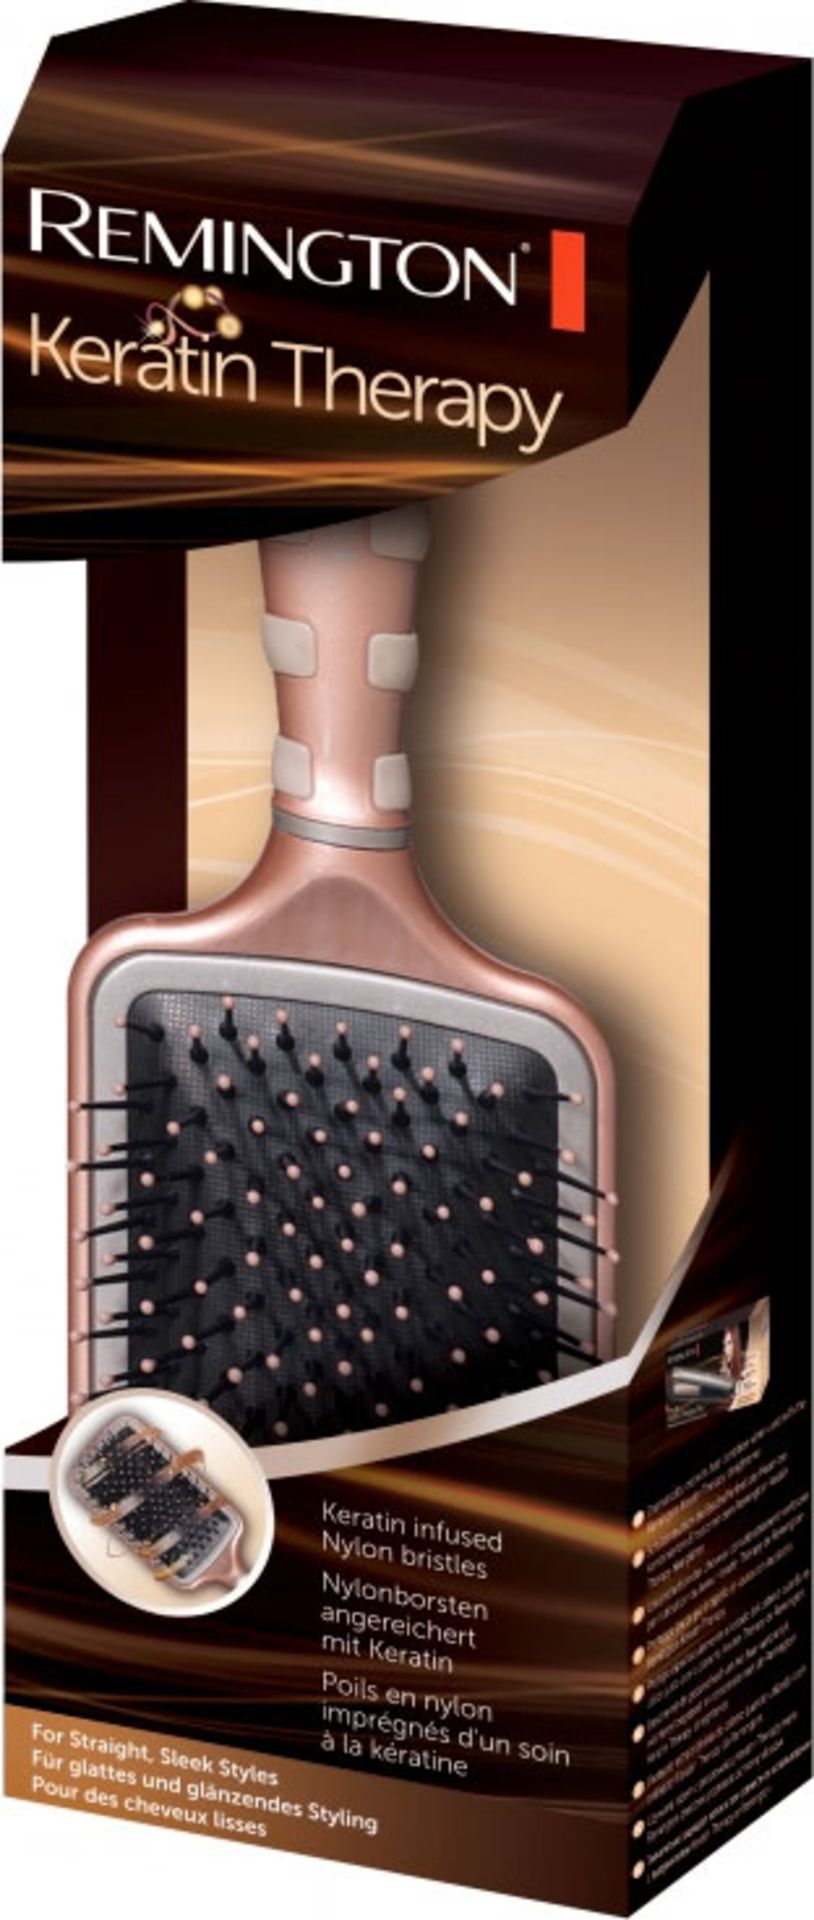 V *TRADE QTY* Brand New Remington Keratin Therapy Paddle Hair Brush For Sleek Straight Styles With - Image 2 of 2